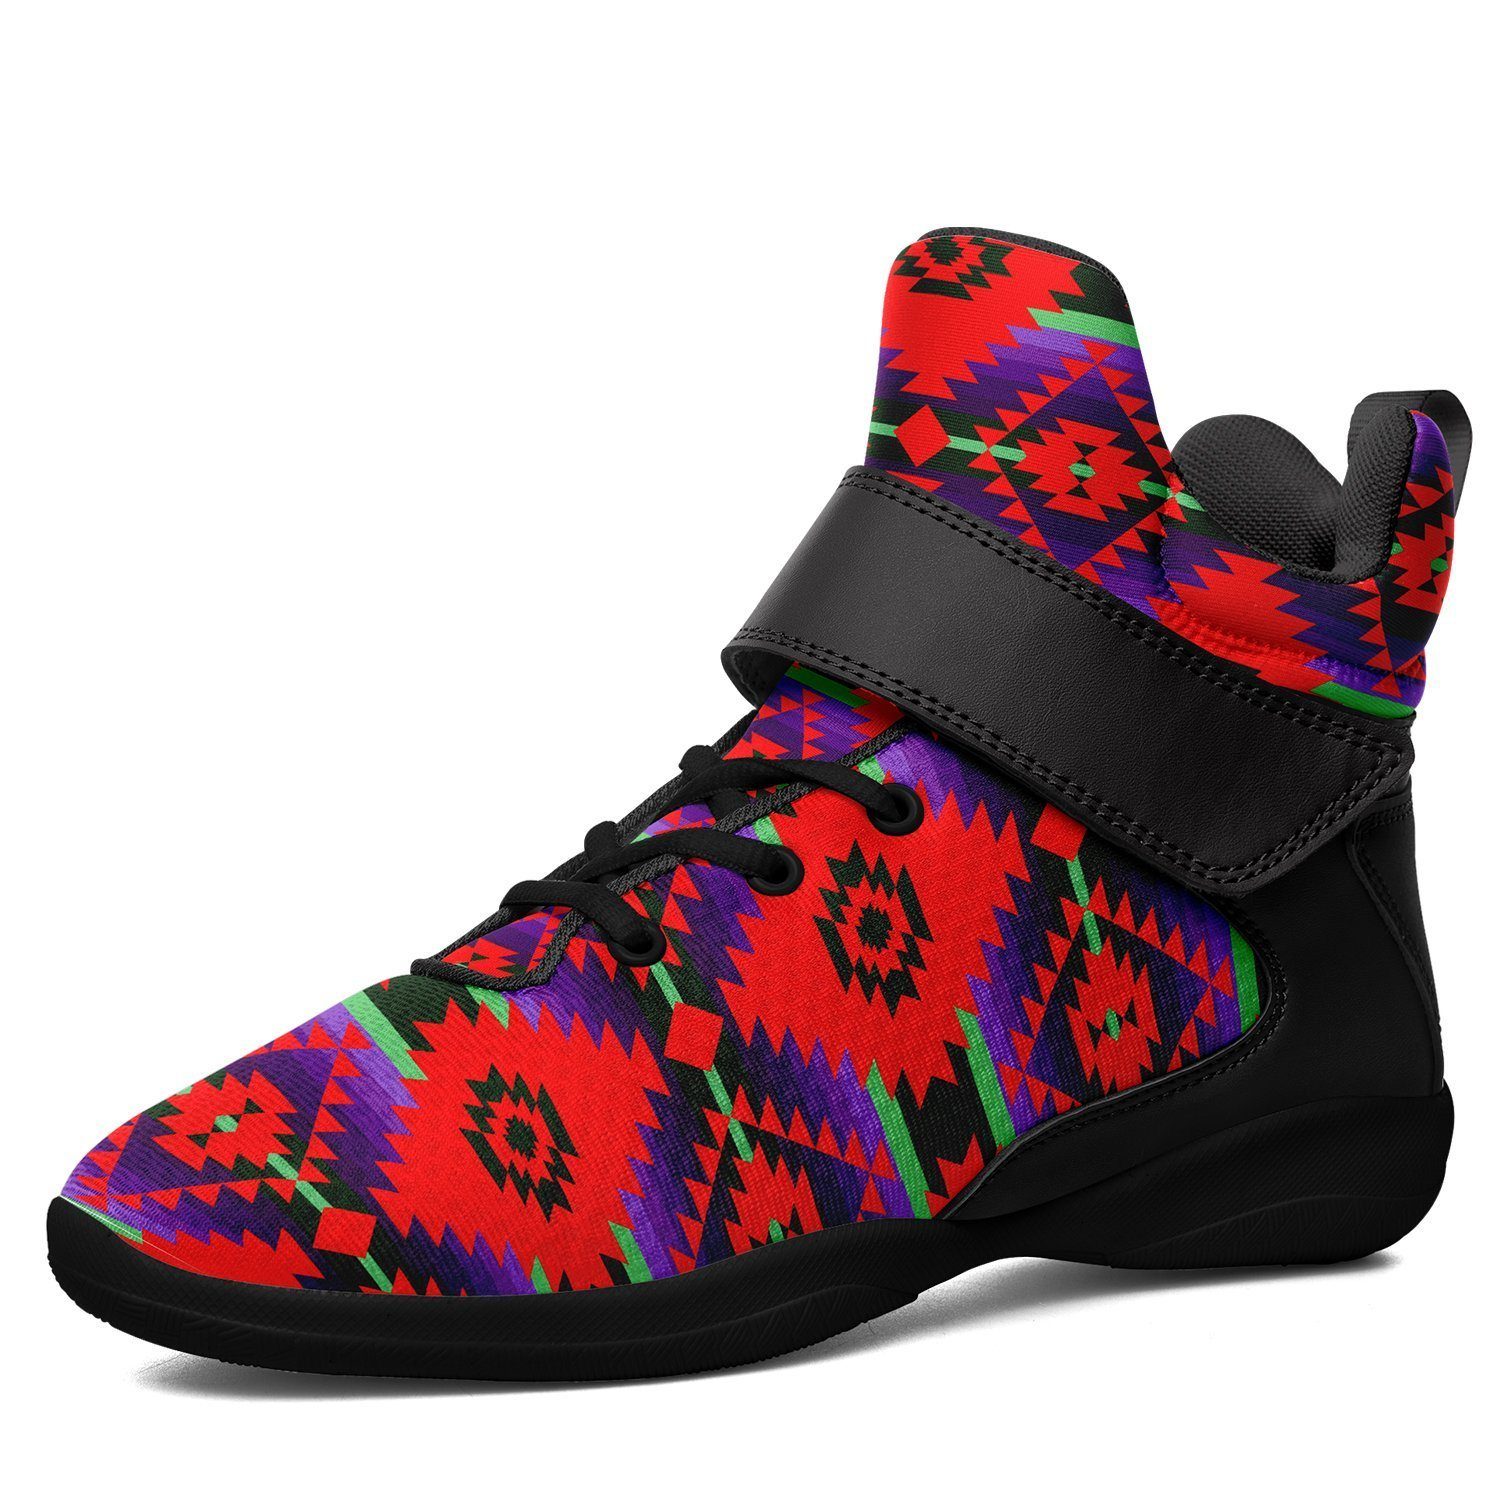 Cree Confederacy Chicken Dance Ipottaa Basketball / Sport High Top Shoes 49 Dzine US Women 4.5 / US Youth 3.5 / EUR 35 Black Sole with Black Strap 